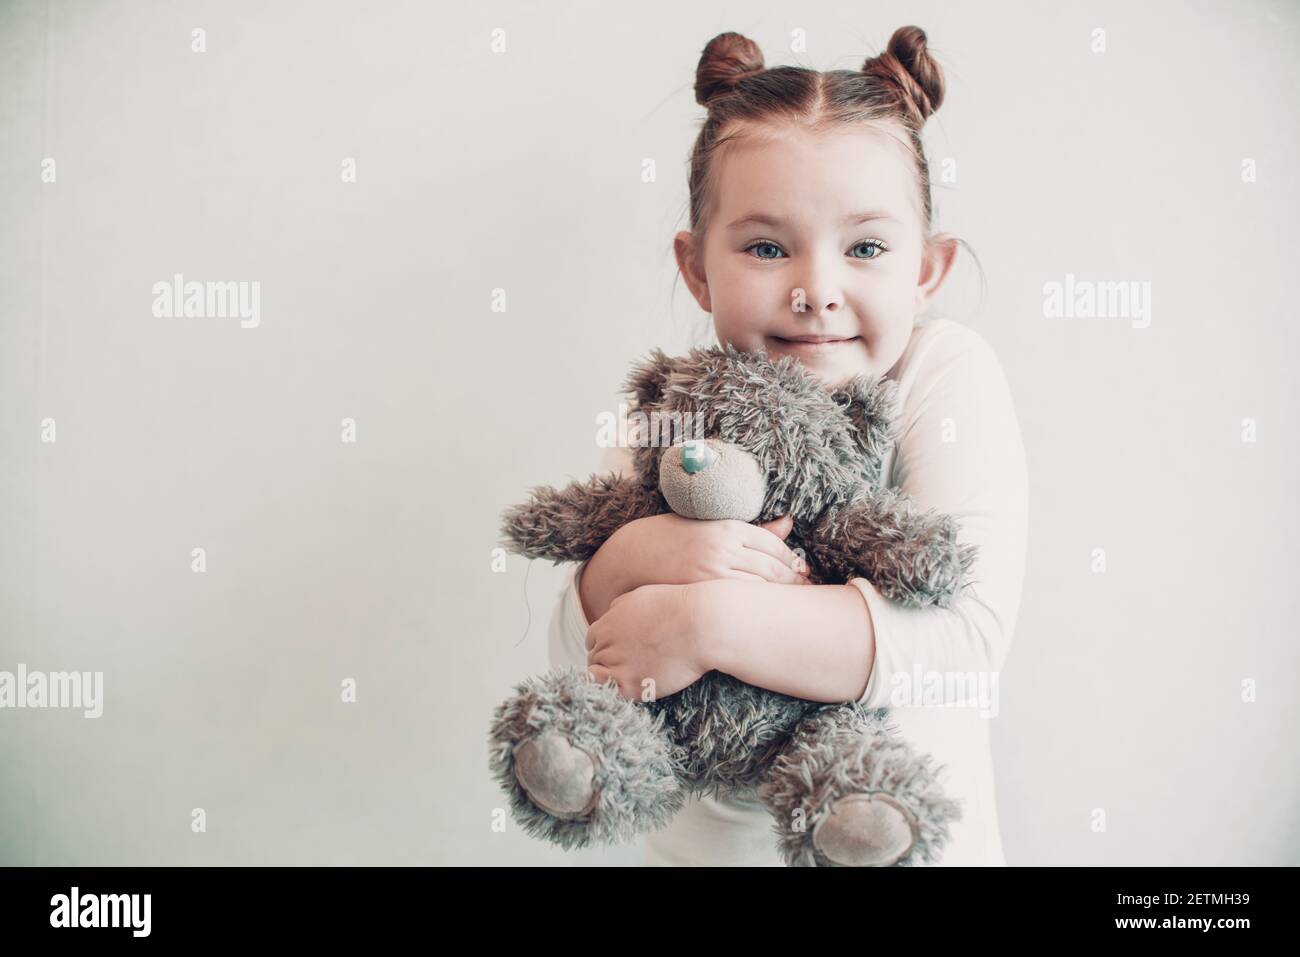 Sad little girl standing with bear. High quality photo Stock Photo